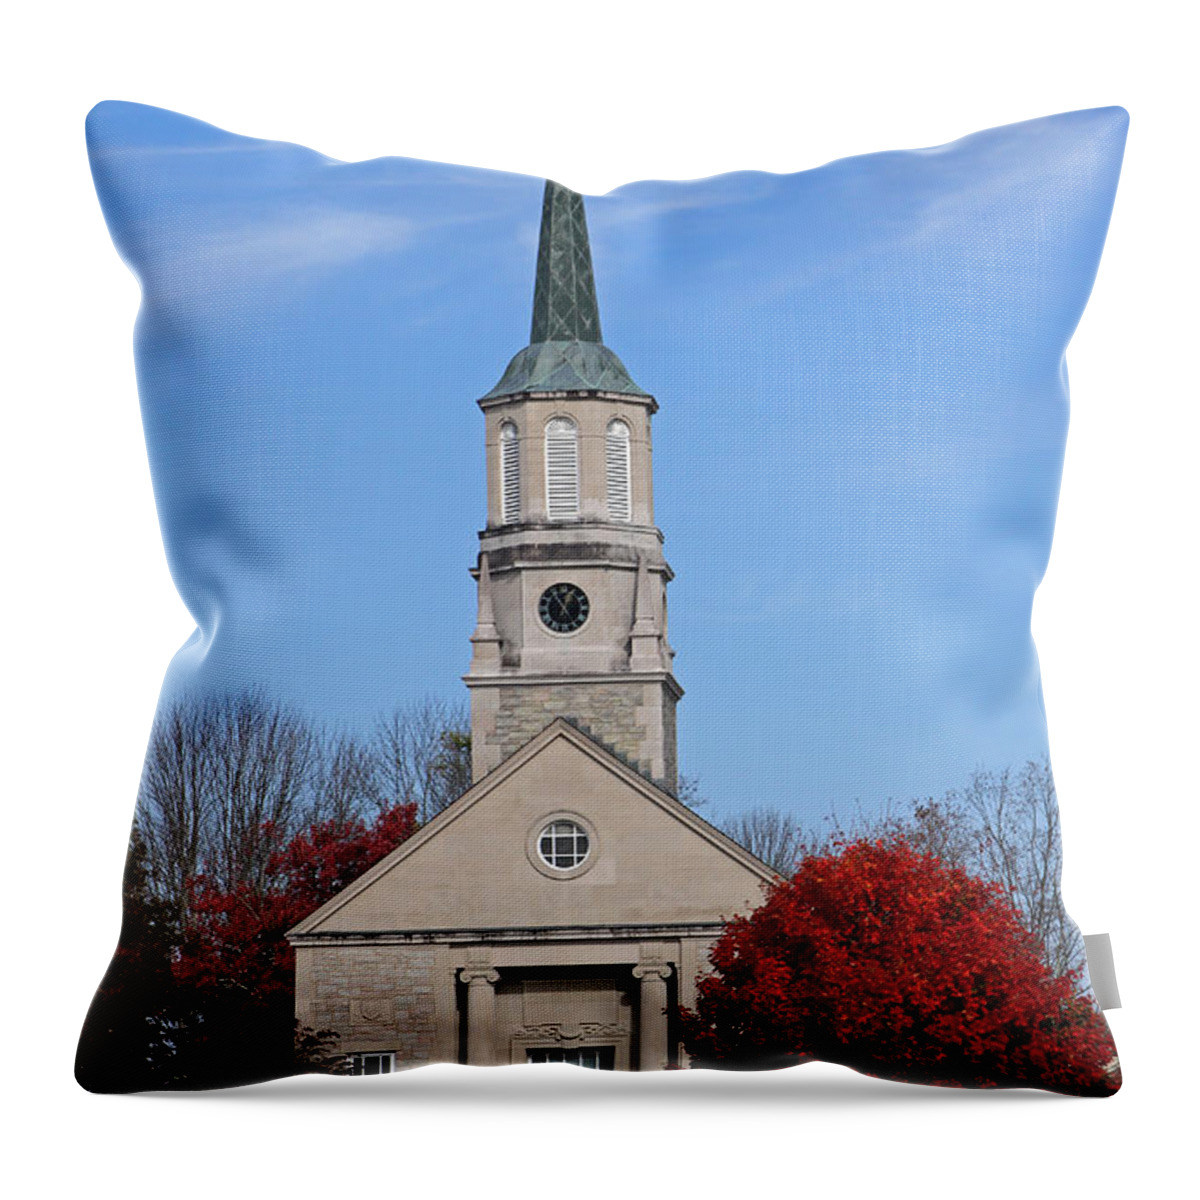 Harkness Throw Pillow featuring the photograph Harkness Chapel at Connecticut College by Juergen Roth